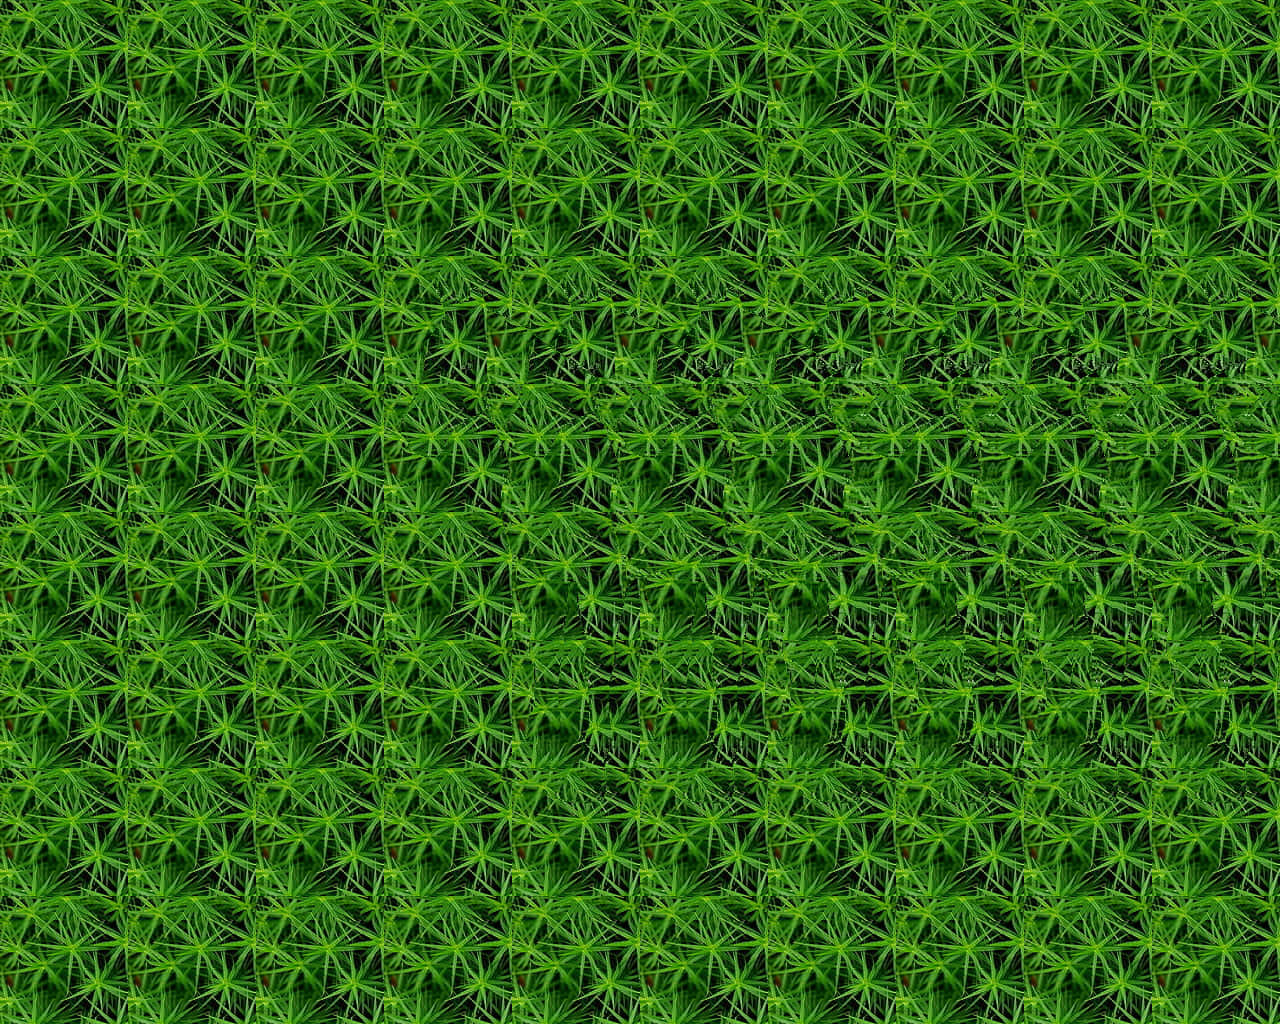 A Green Grass Background With A Lot Of Small Leaves